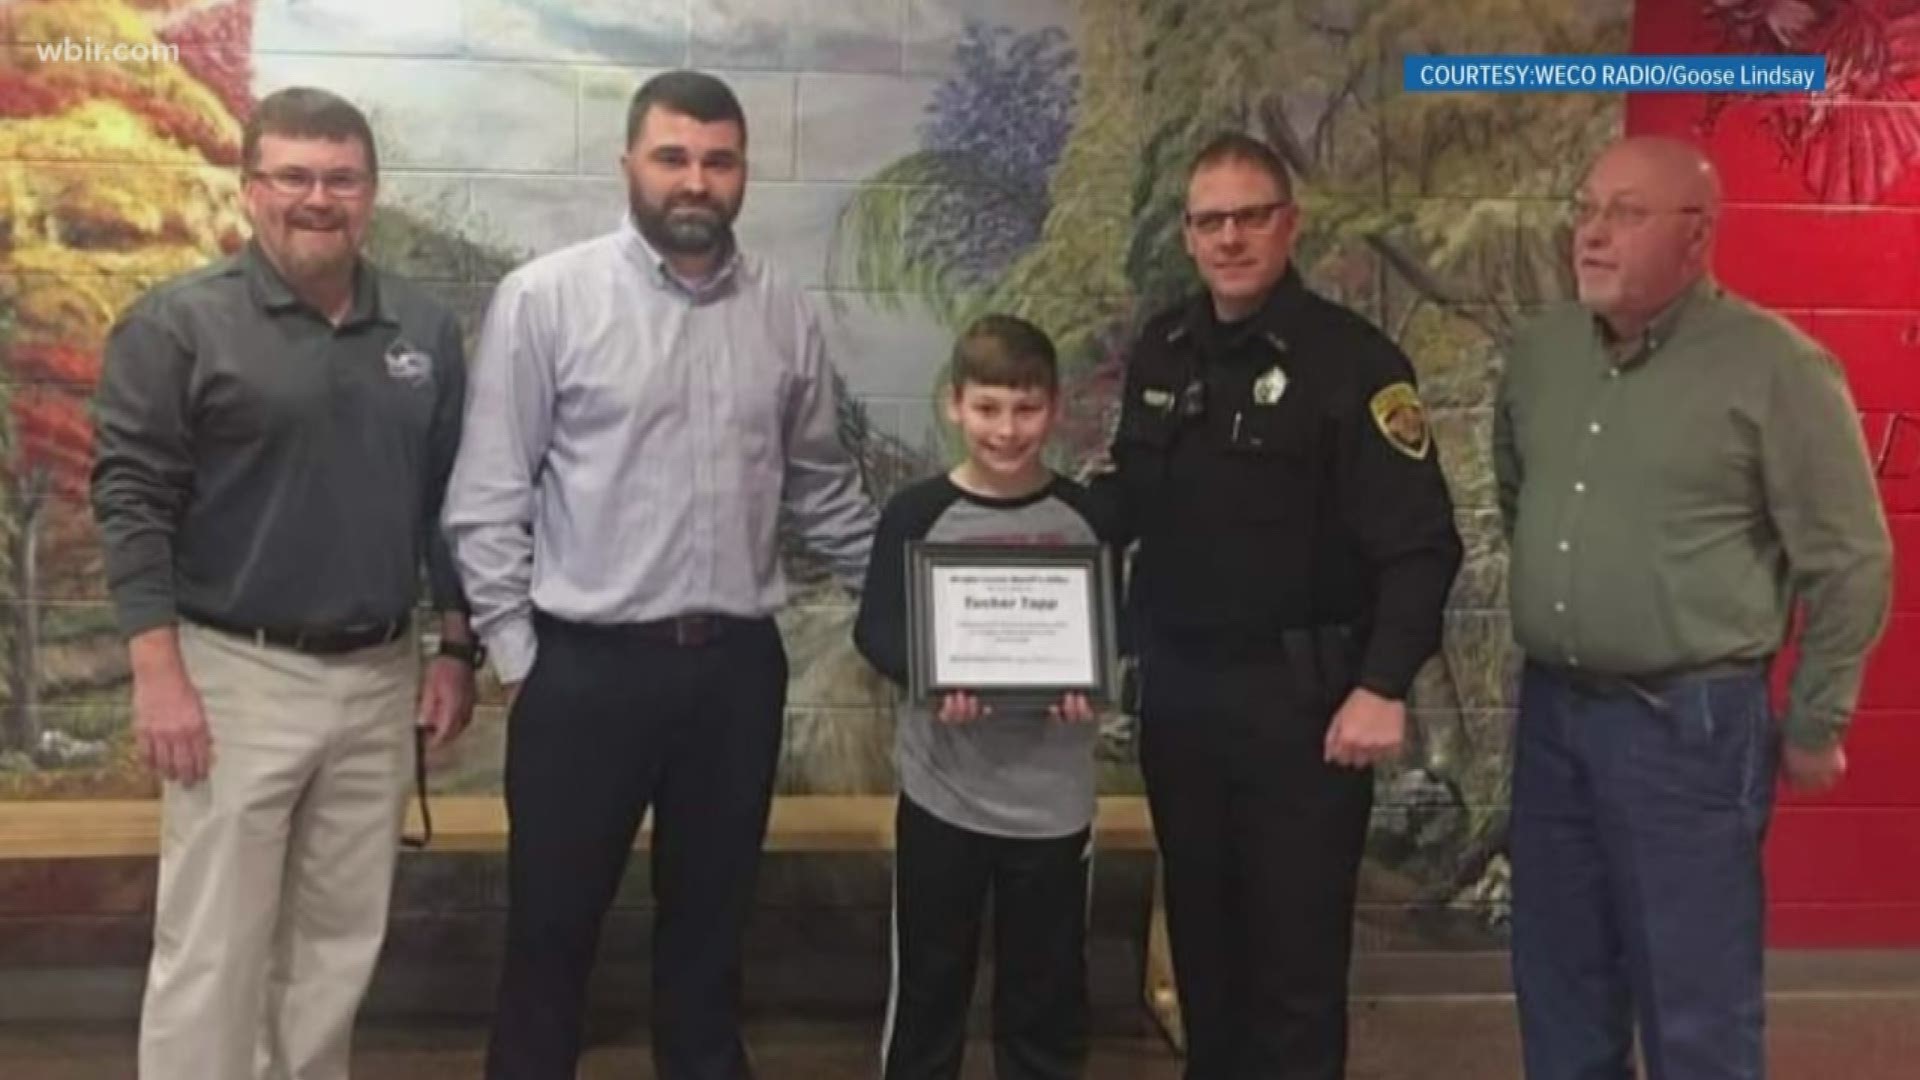 The Morgan County Sheriff's Office honored Tucker for performing the Heimlich maneuver on another student -- saving his life.